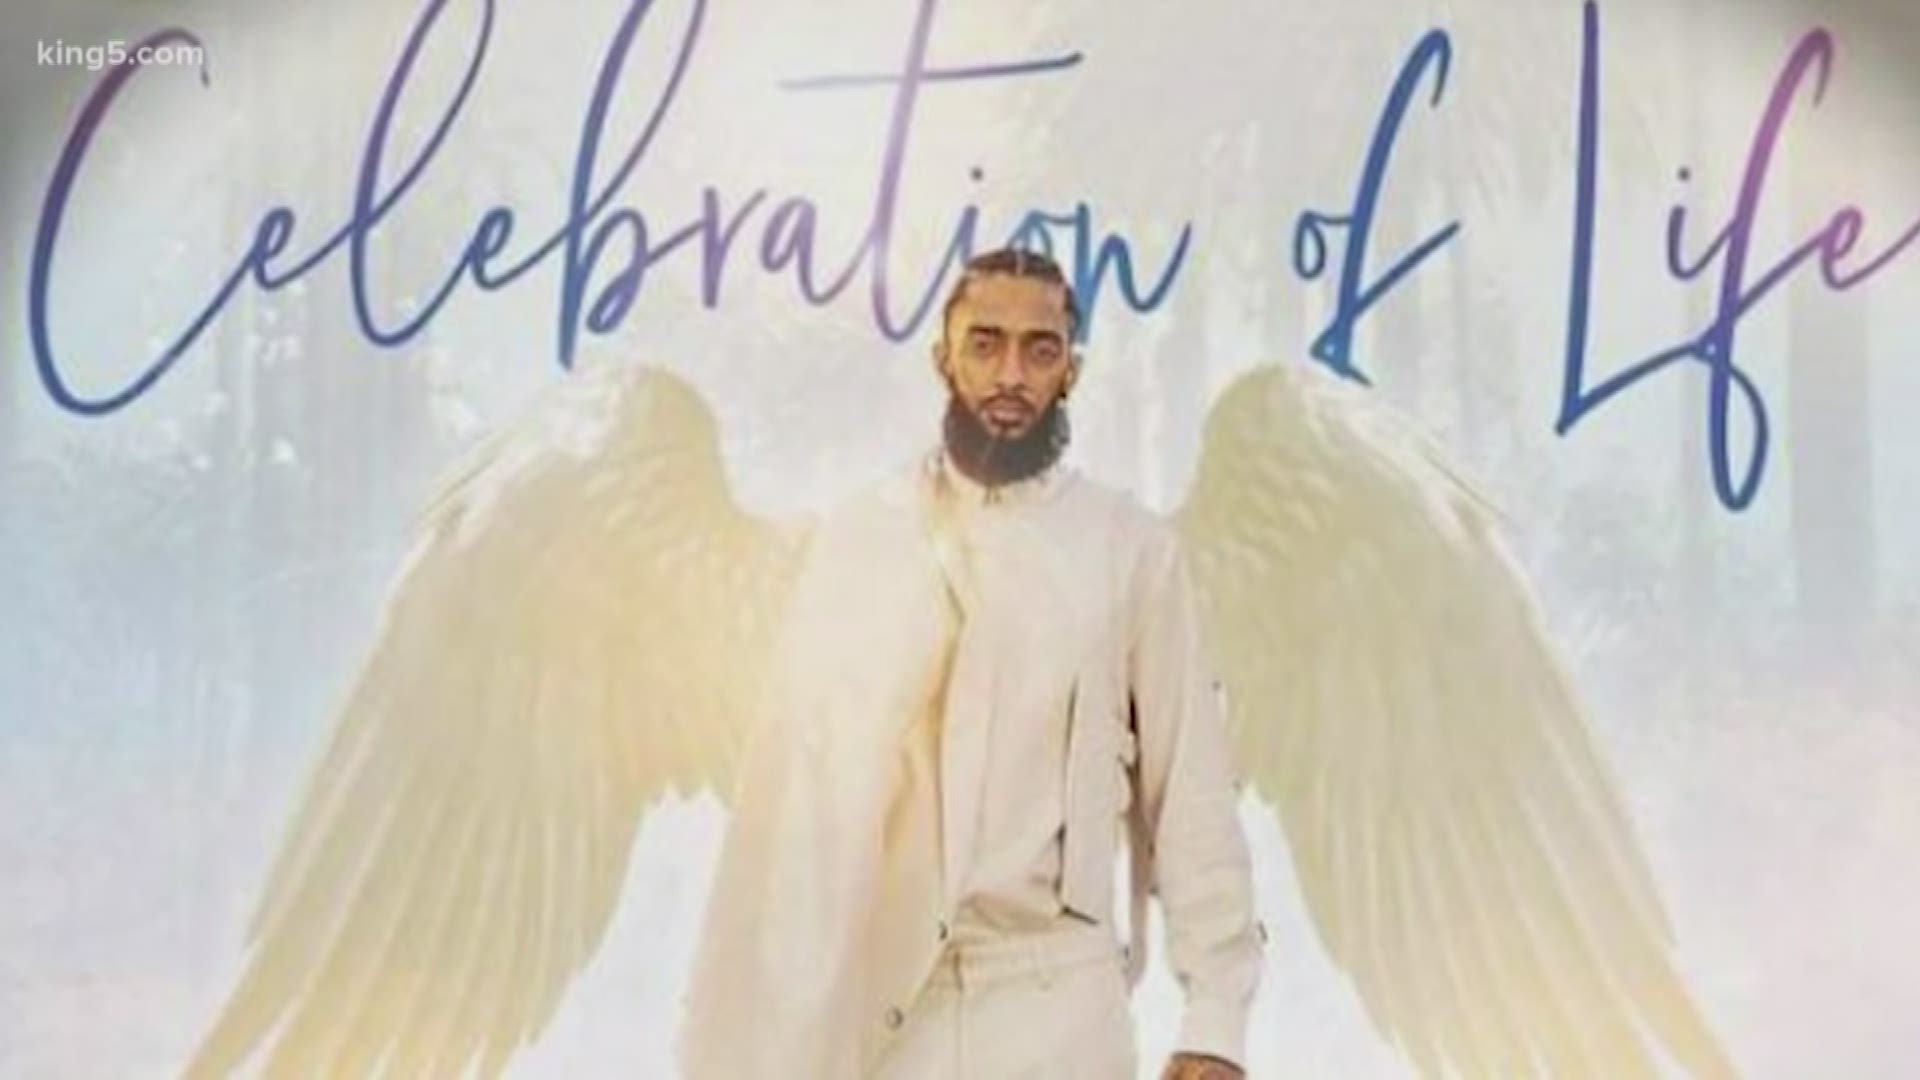 KING 5’s Jenna Hanchard and photojournalist Ryan Beard went to Los Angeles as the world honored Nipsey Hussle during his memorial service.